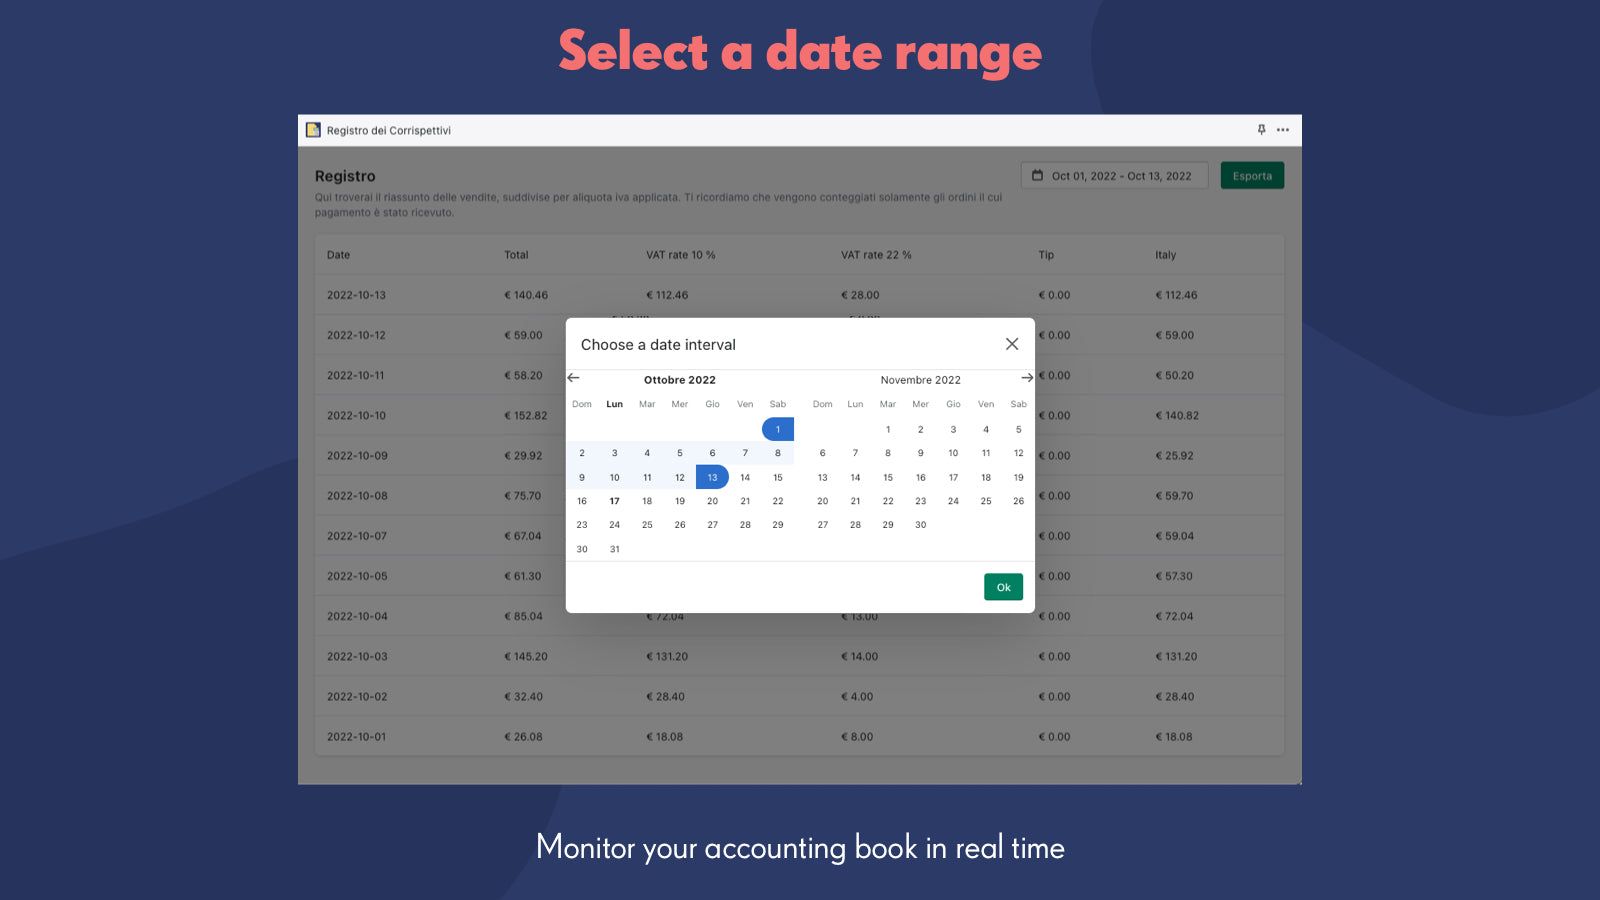 Monitor your accounting book in real time